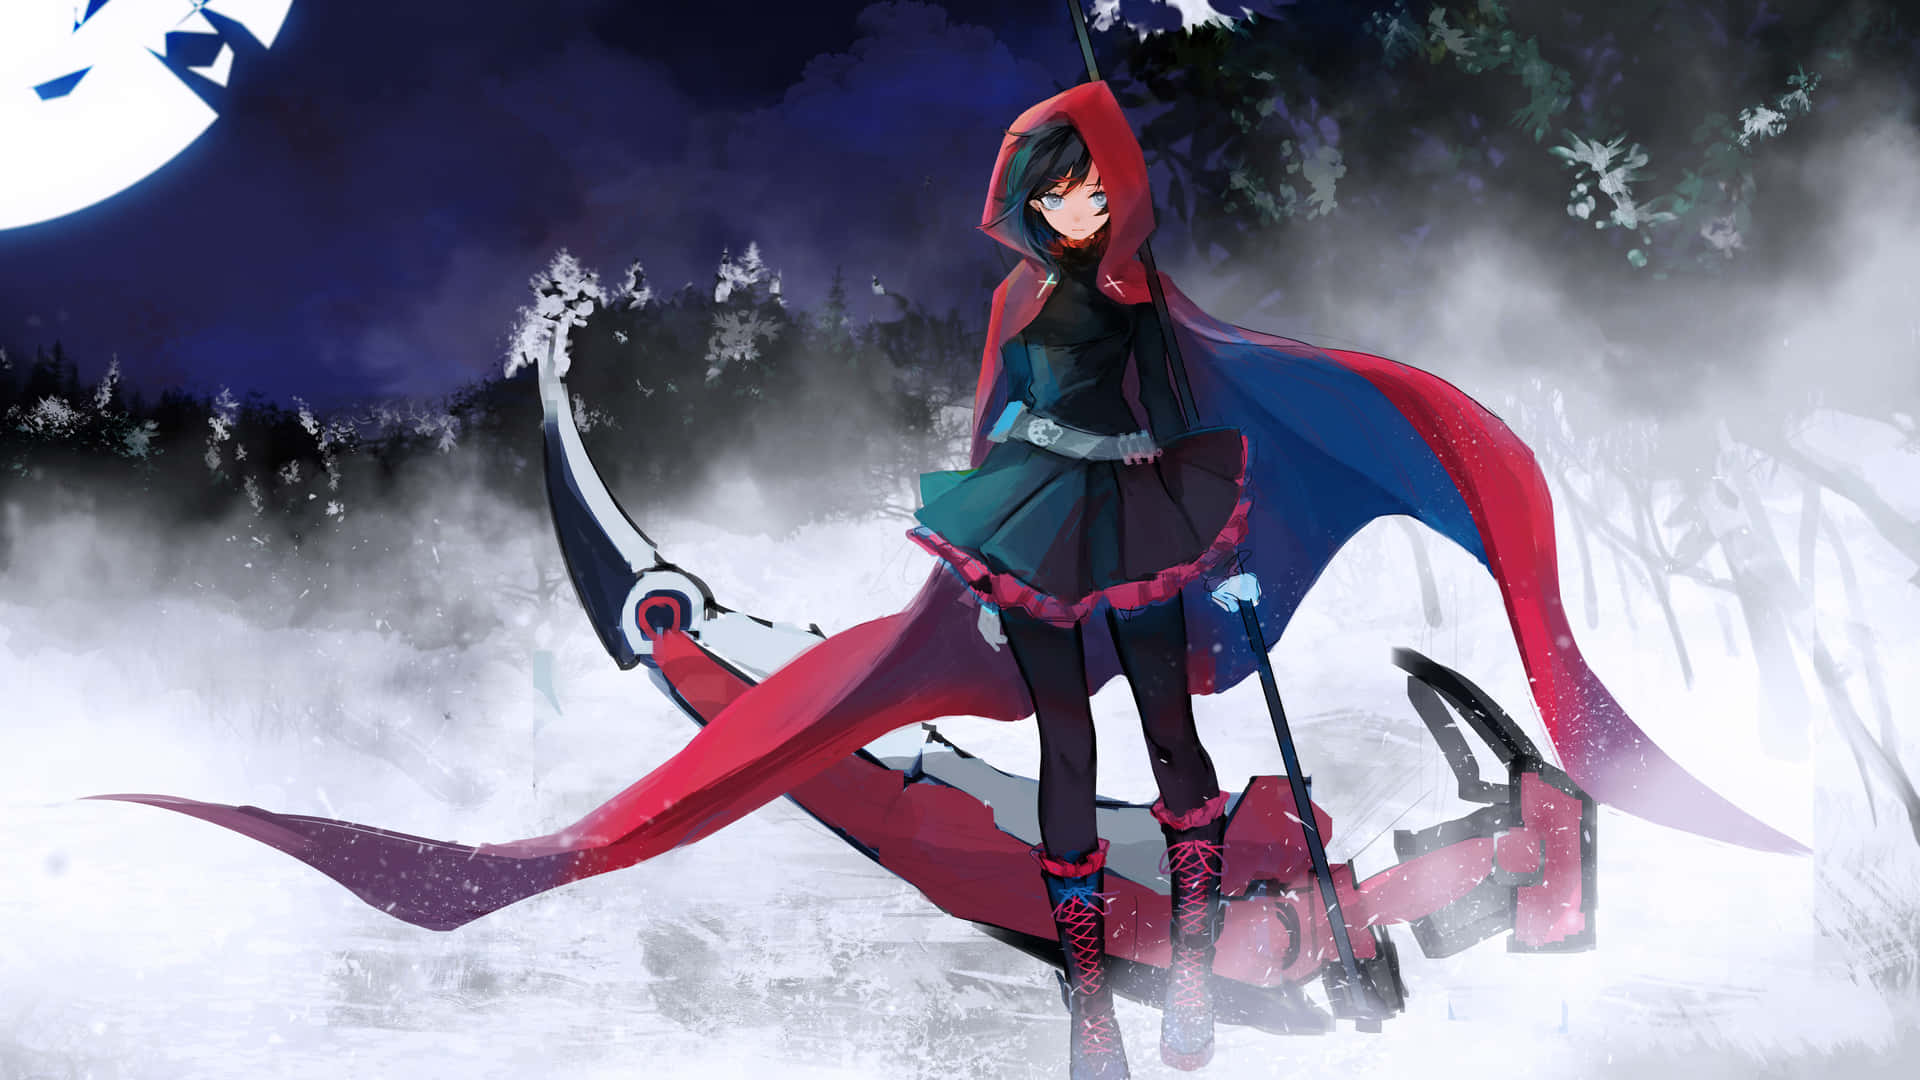 Discover your destiny as you explore the world of Remnant in RWBY